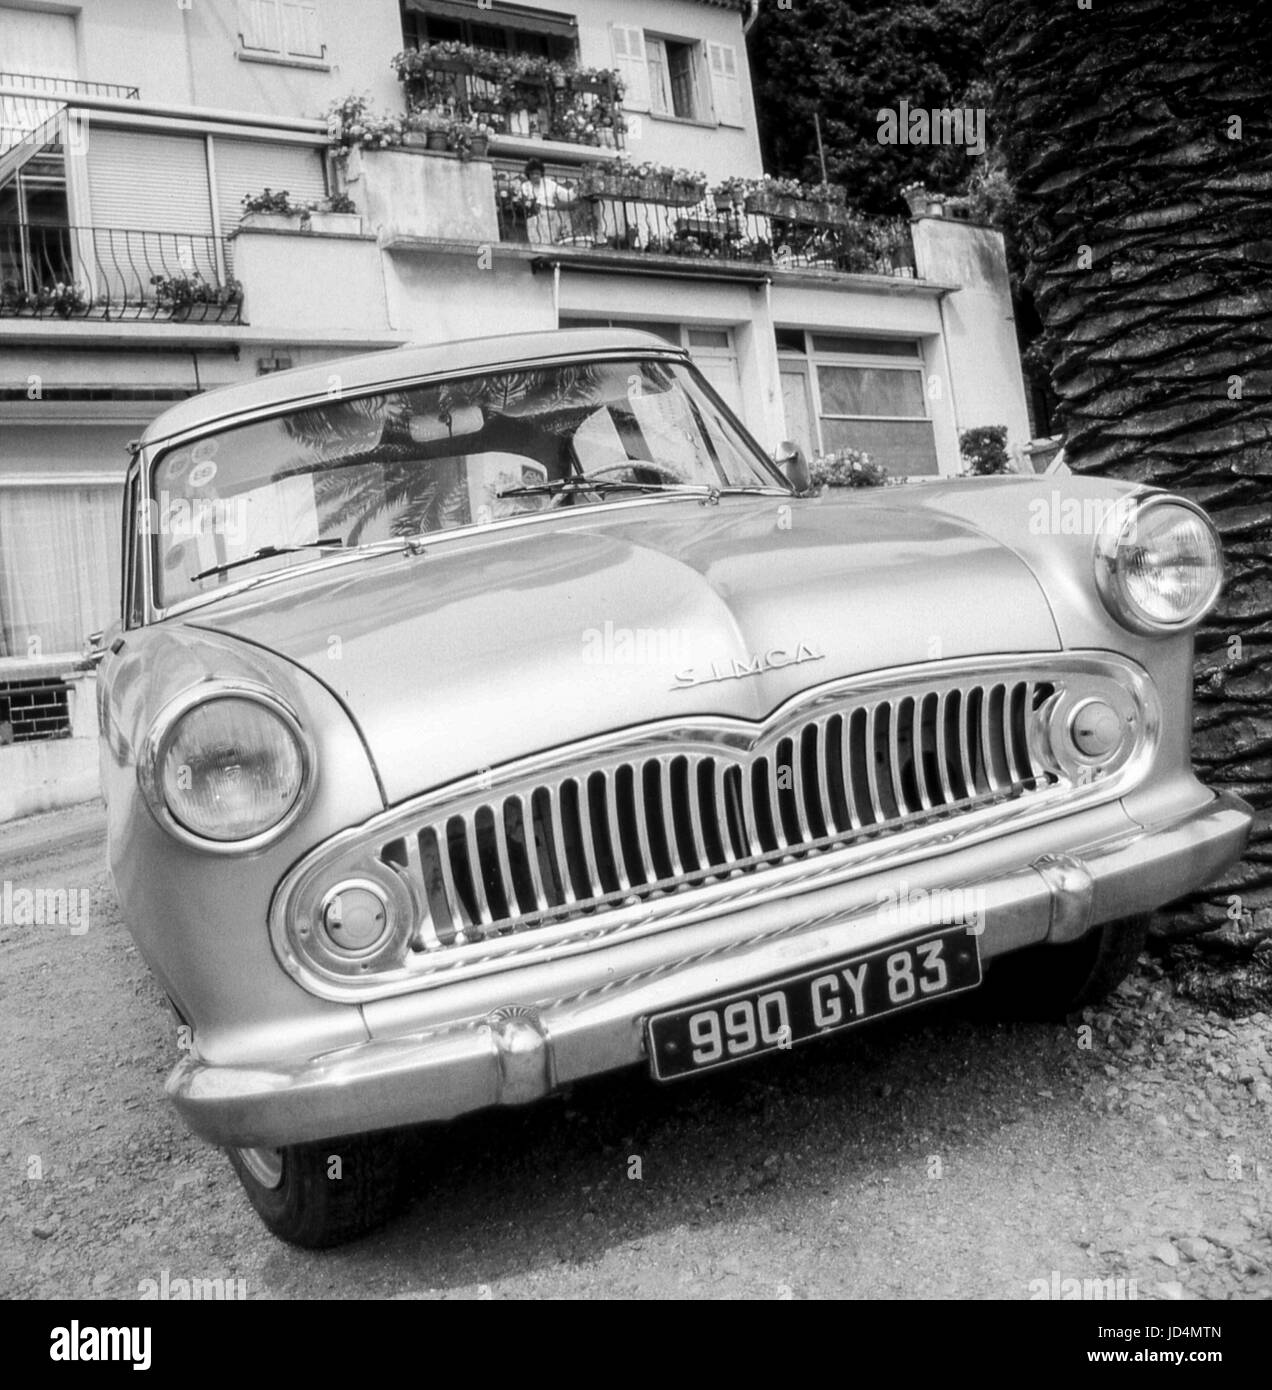 FRANCE - SIMCA VEDETTE BERLINE 50's - VAR SOUTH OF FRANCE - FRENCH CAR - VINTAGE FRENCH CAR © Frédéric BEAUMONT Stock Photo